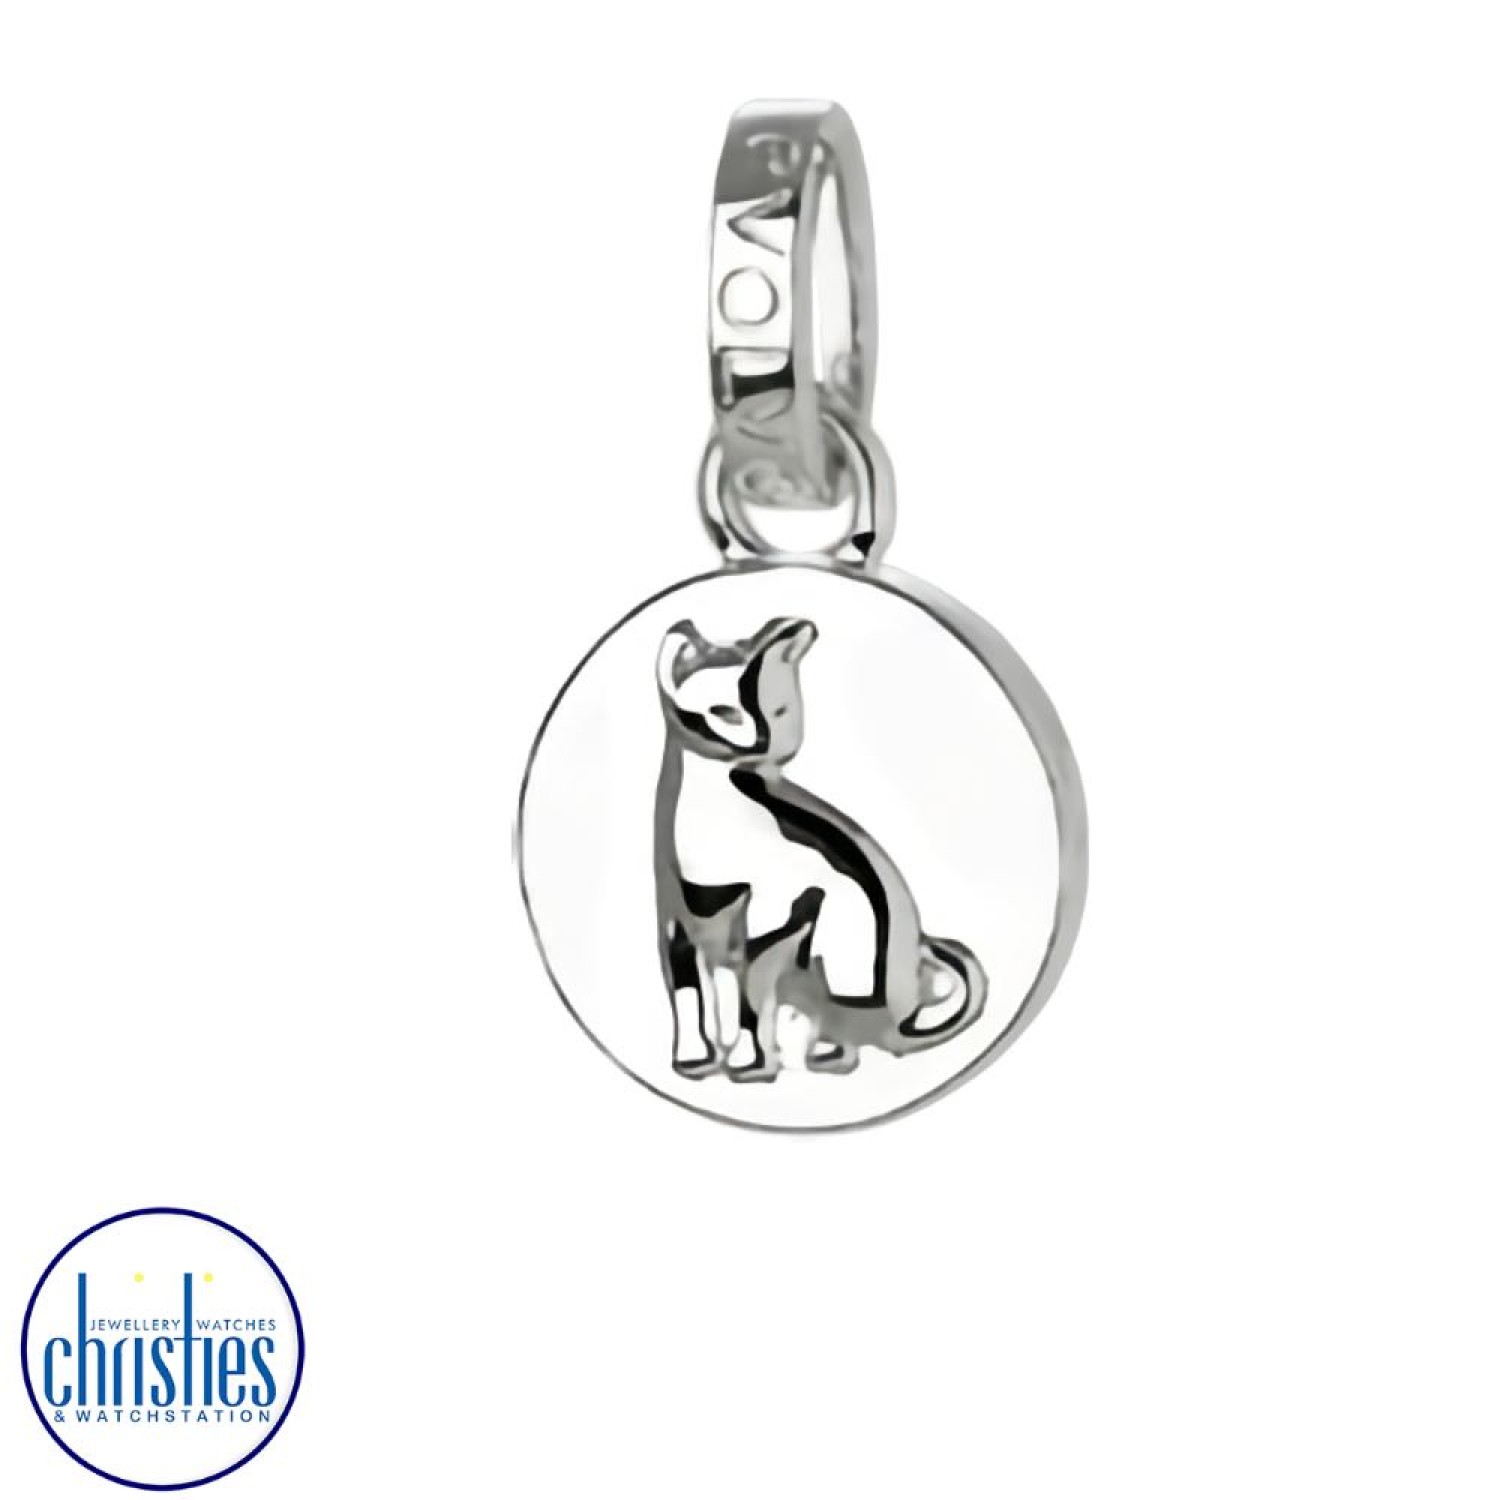 LKD059 Evolve Silver Cat Charm. Cats are the perfect companion, small and low maintenance. charm bracelets like pandora